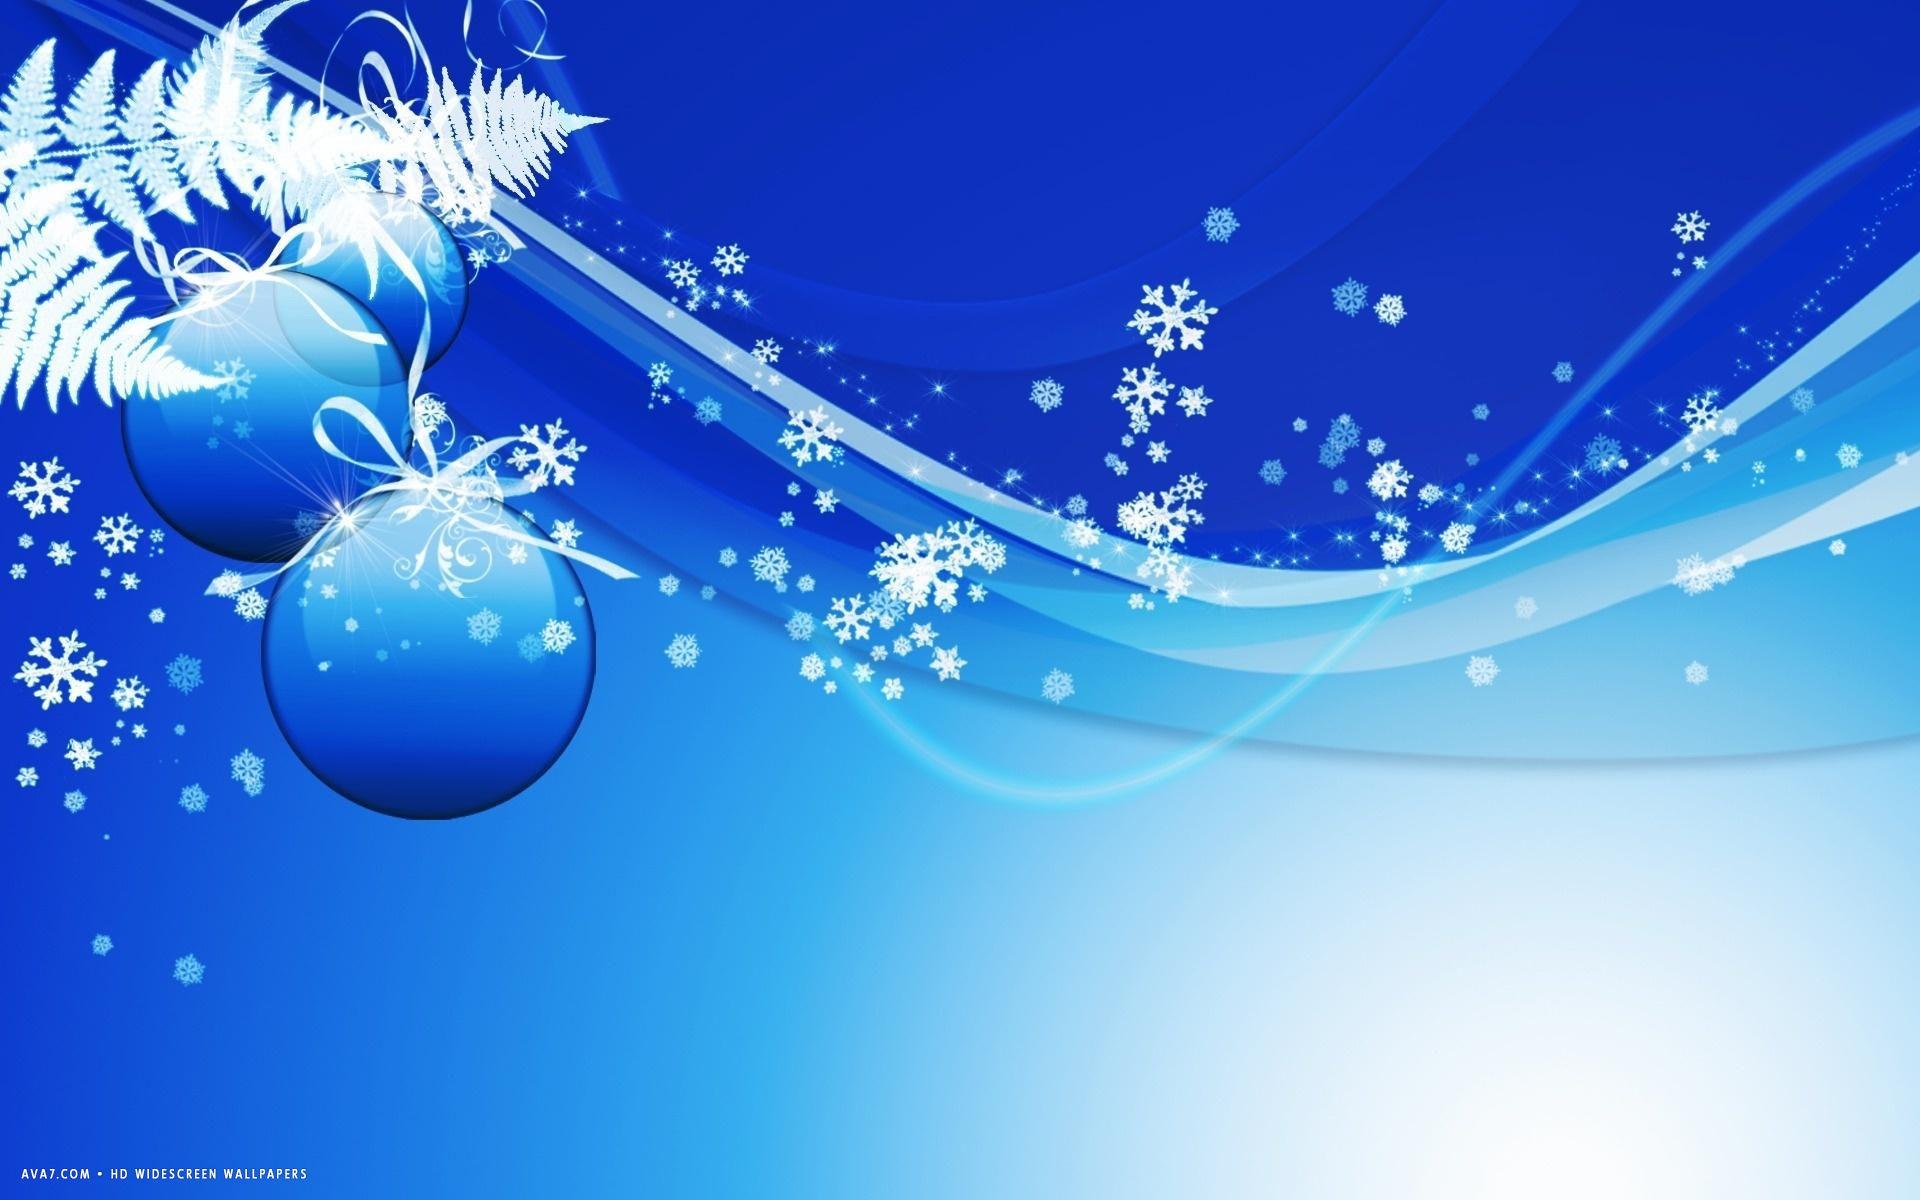 blue christmas balls winter snow abstract vector holiday HD widescreen wallpaper / holidays background